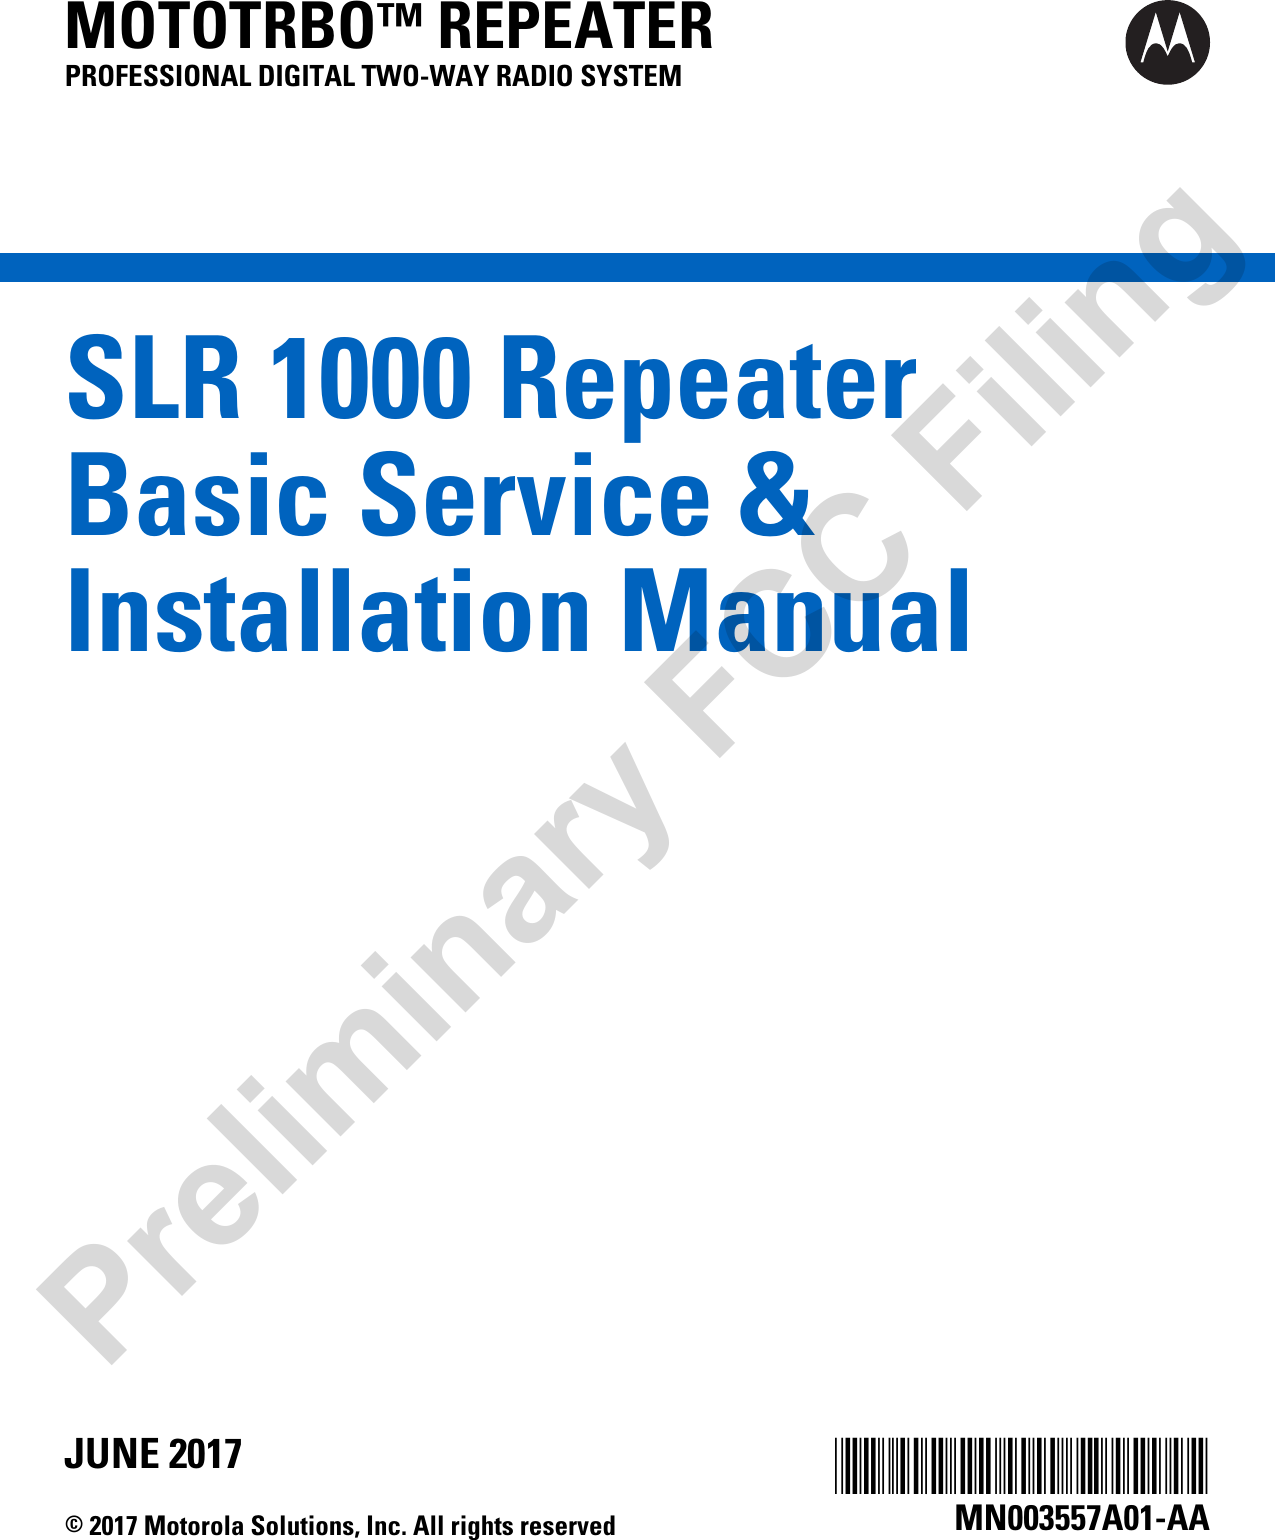 SLR 1000 RepeaterBasic Service &amp;Installation ManualMOTOTRBO™ REPEATERPROFESSIONAL DIGITAL TWO-WAY RADIO SYSTEM*MN003557A01*MN003557A01-AAJUNE 2017© 2017 Motorola Solutions, Inc. All rights reservedPreliminary FCC Filing